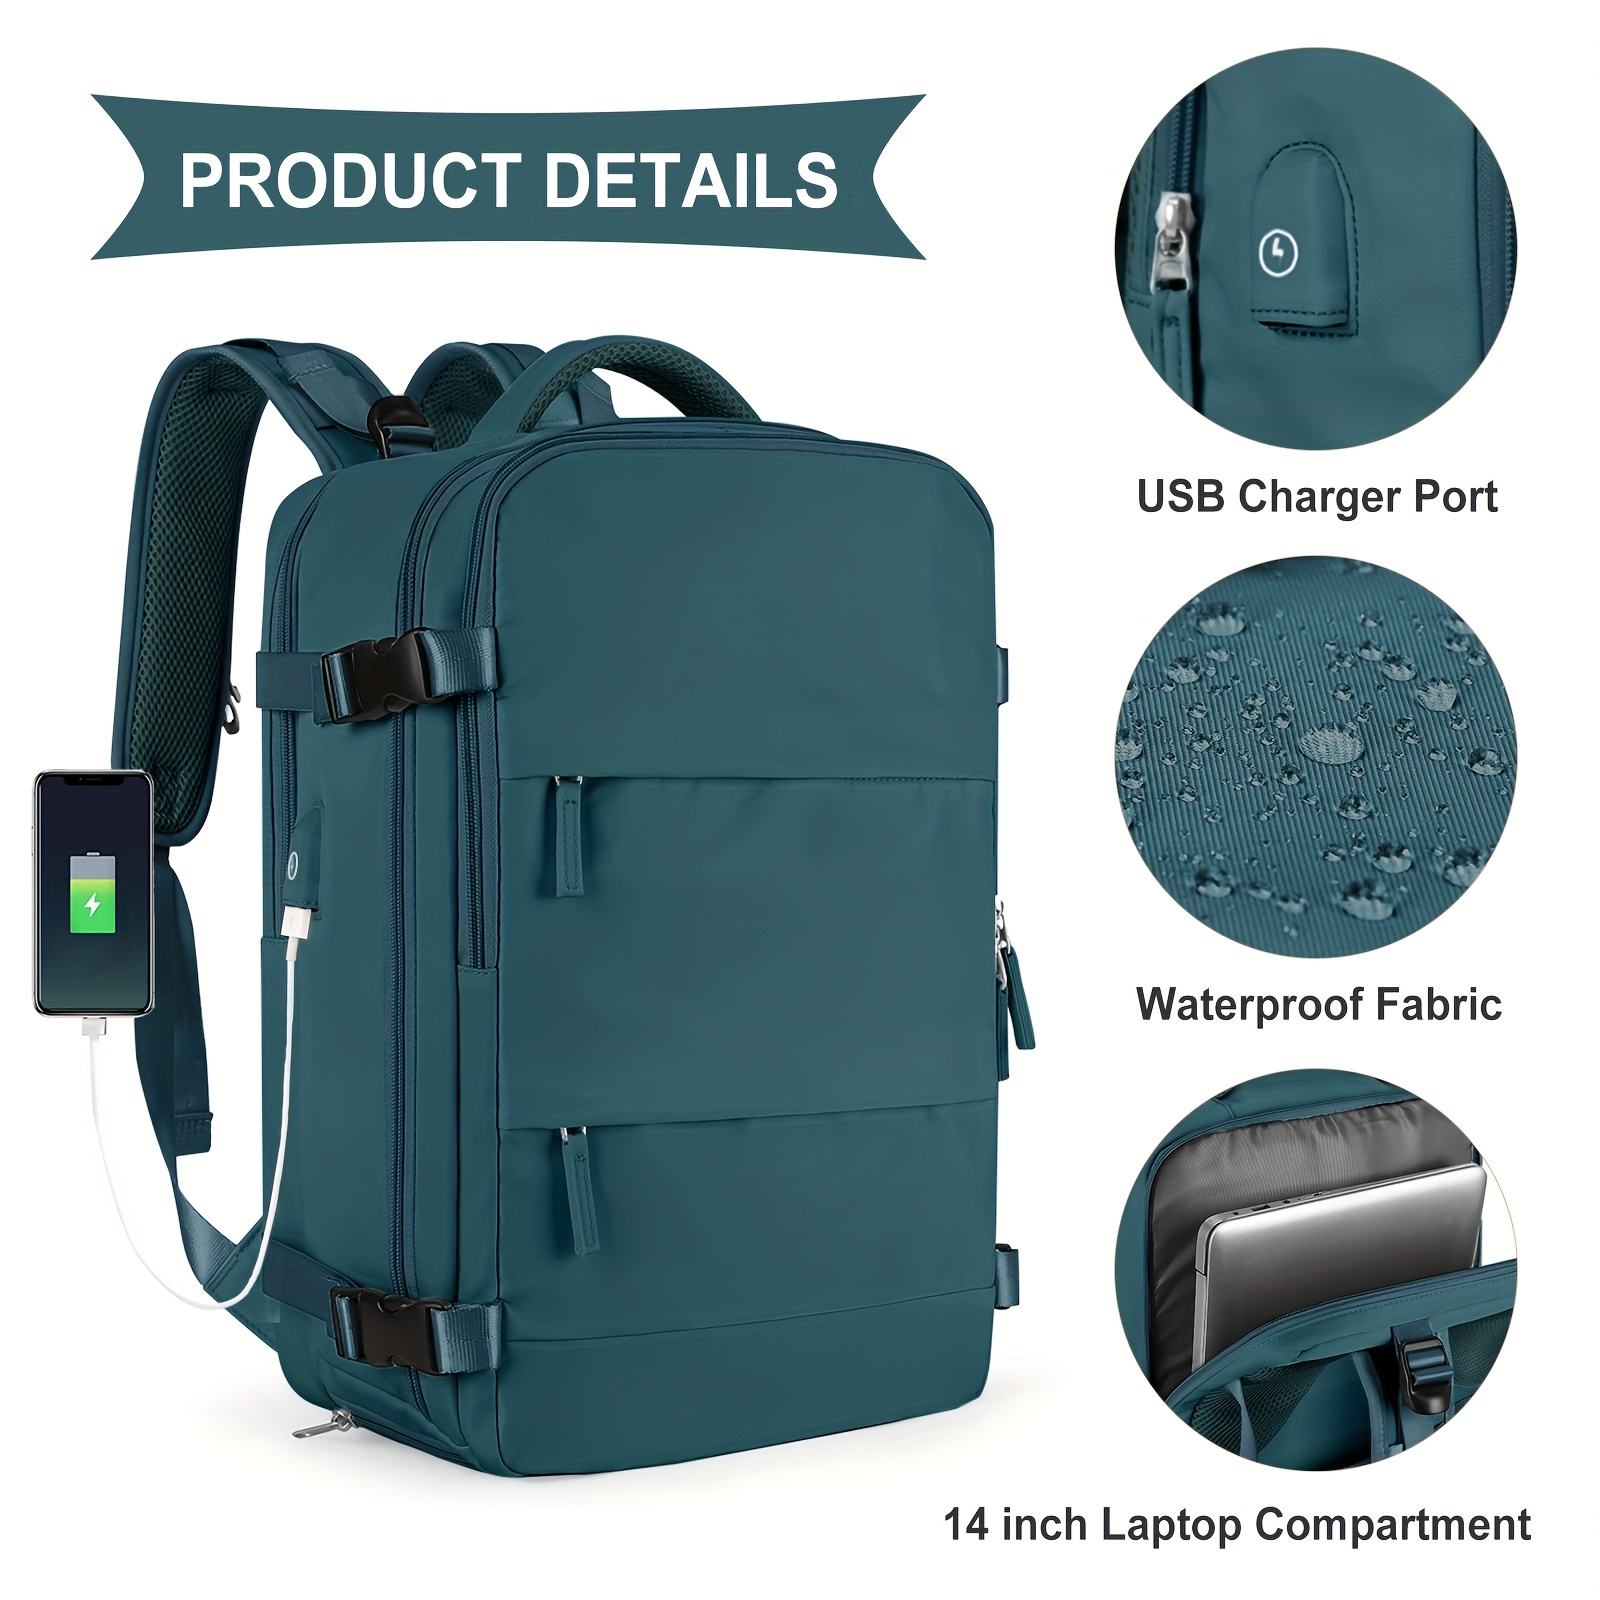 Stitch Multifunction Backpack Travel Backpack School Bag with USB